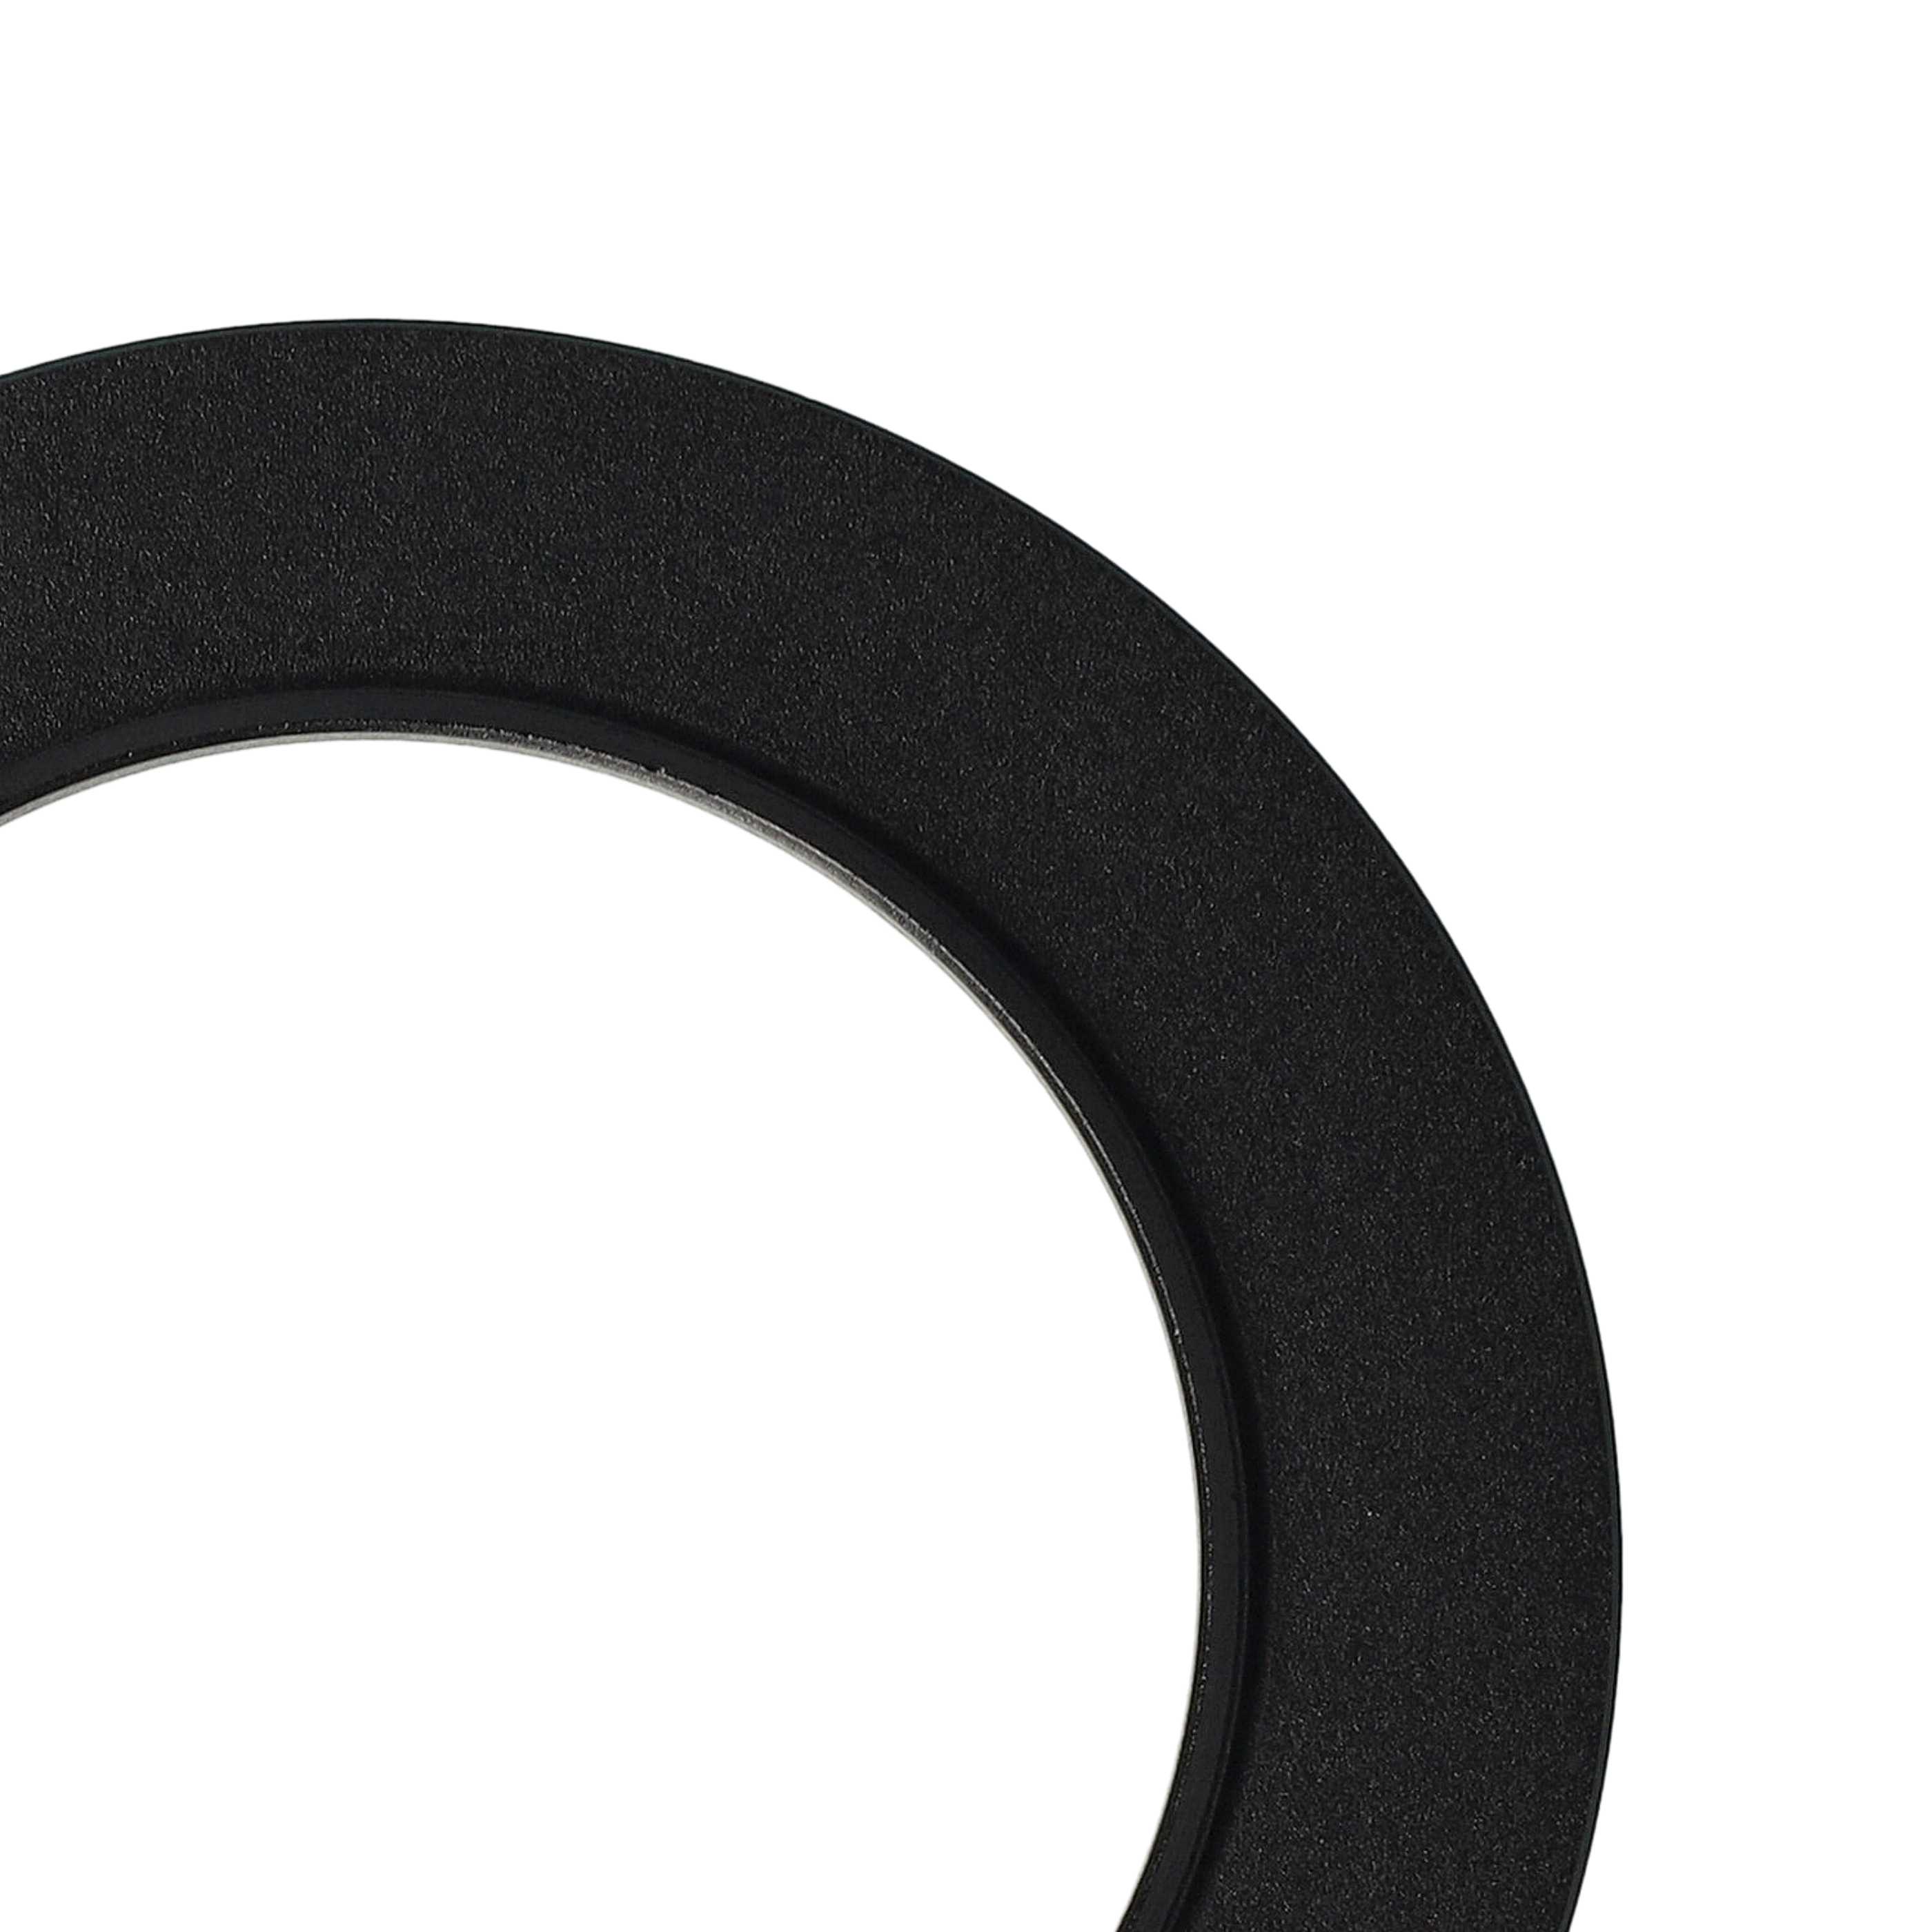 Step-Up Ring Adapter of 52 mm to 72 mmfor various Camera Lens - Filter Adapter